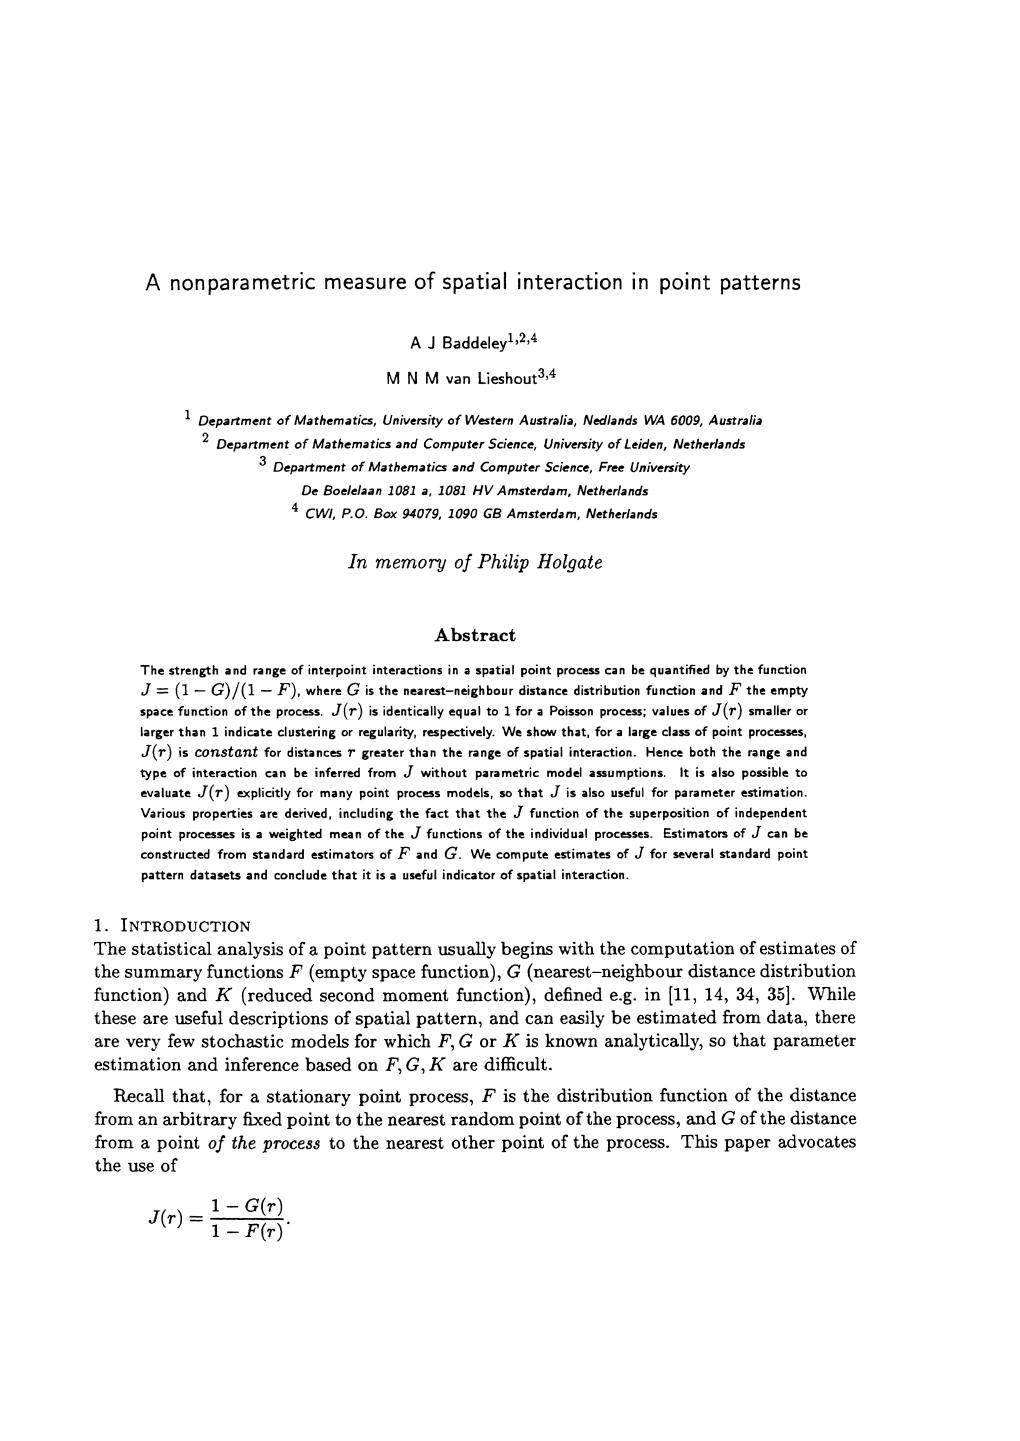 A Non Parametric Measure of Spatial Interaction in Point Patterns